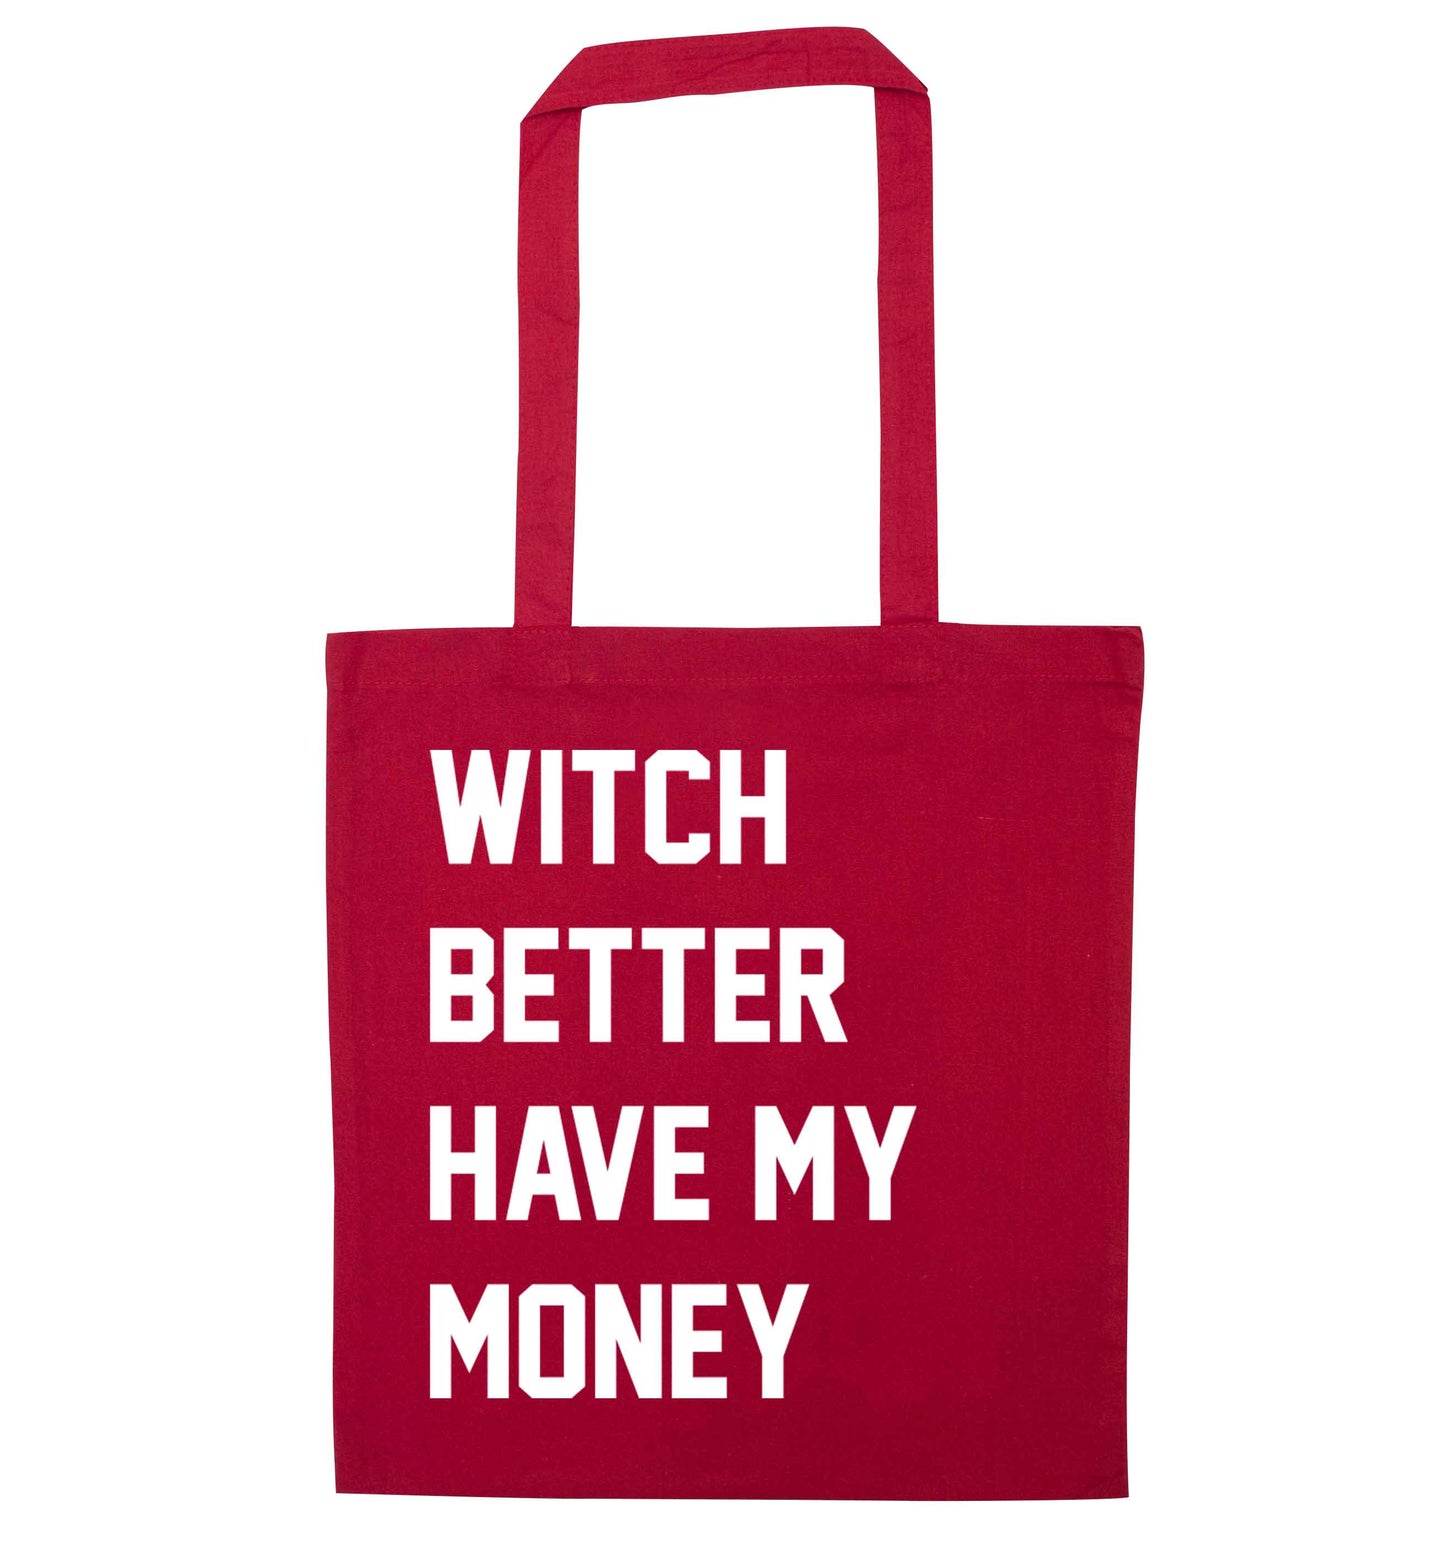 Witch better have my money red tote bag